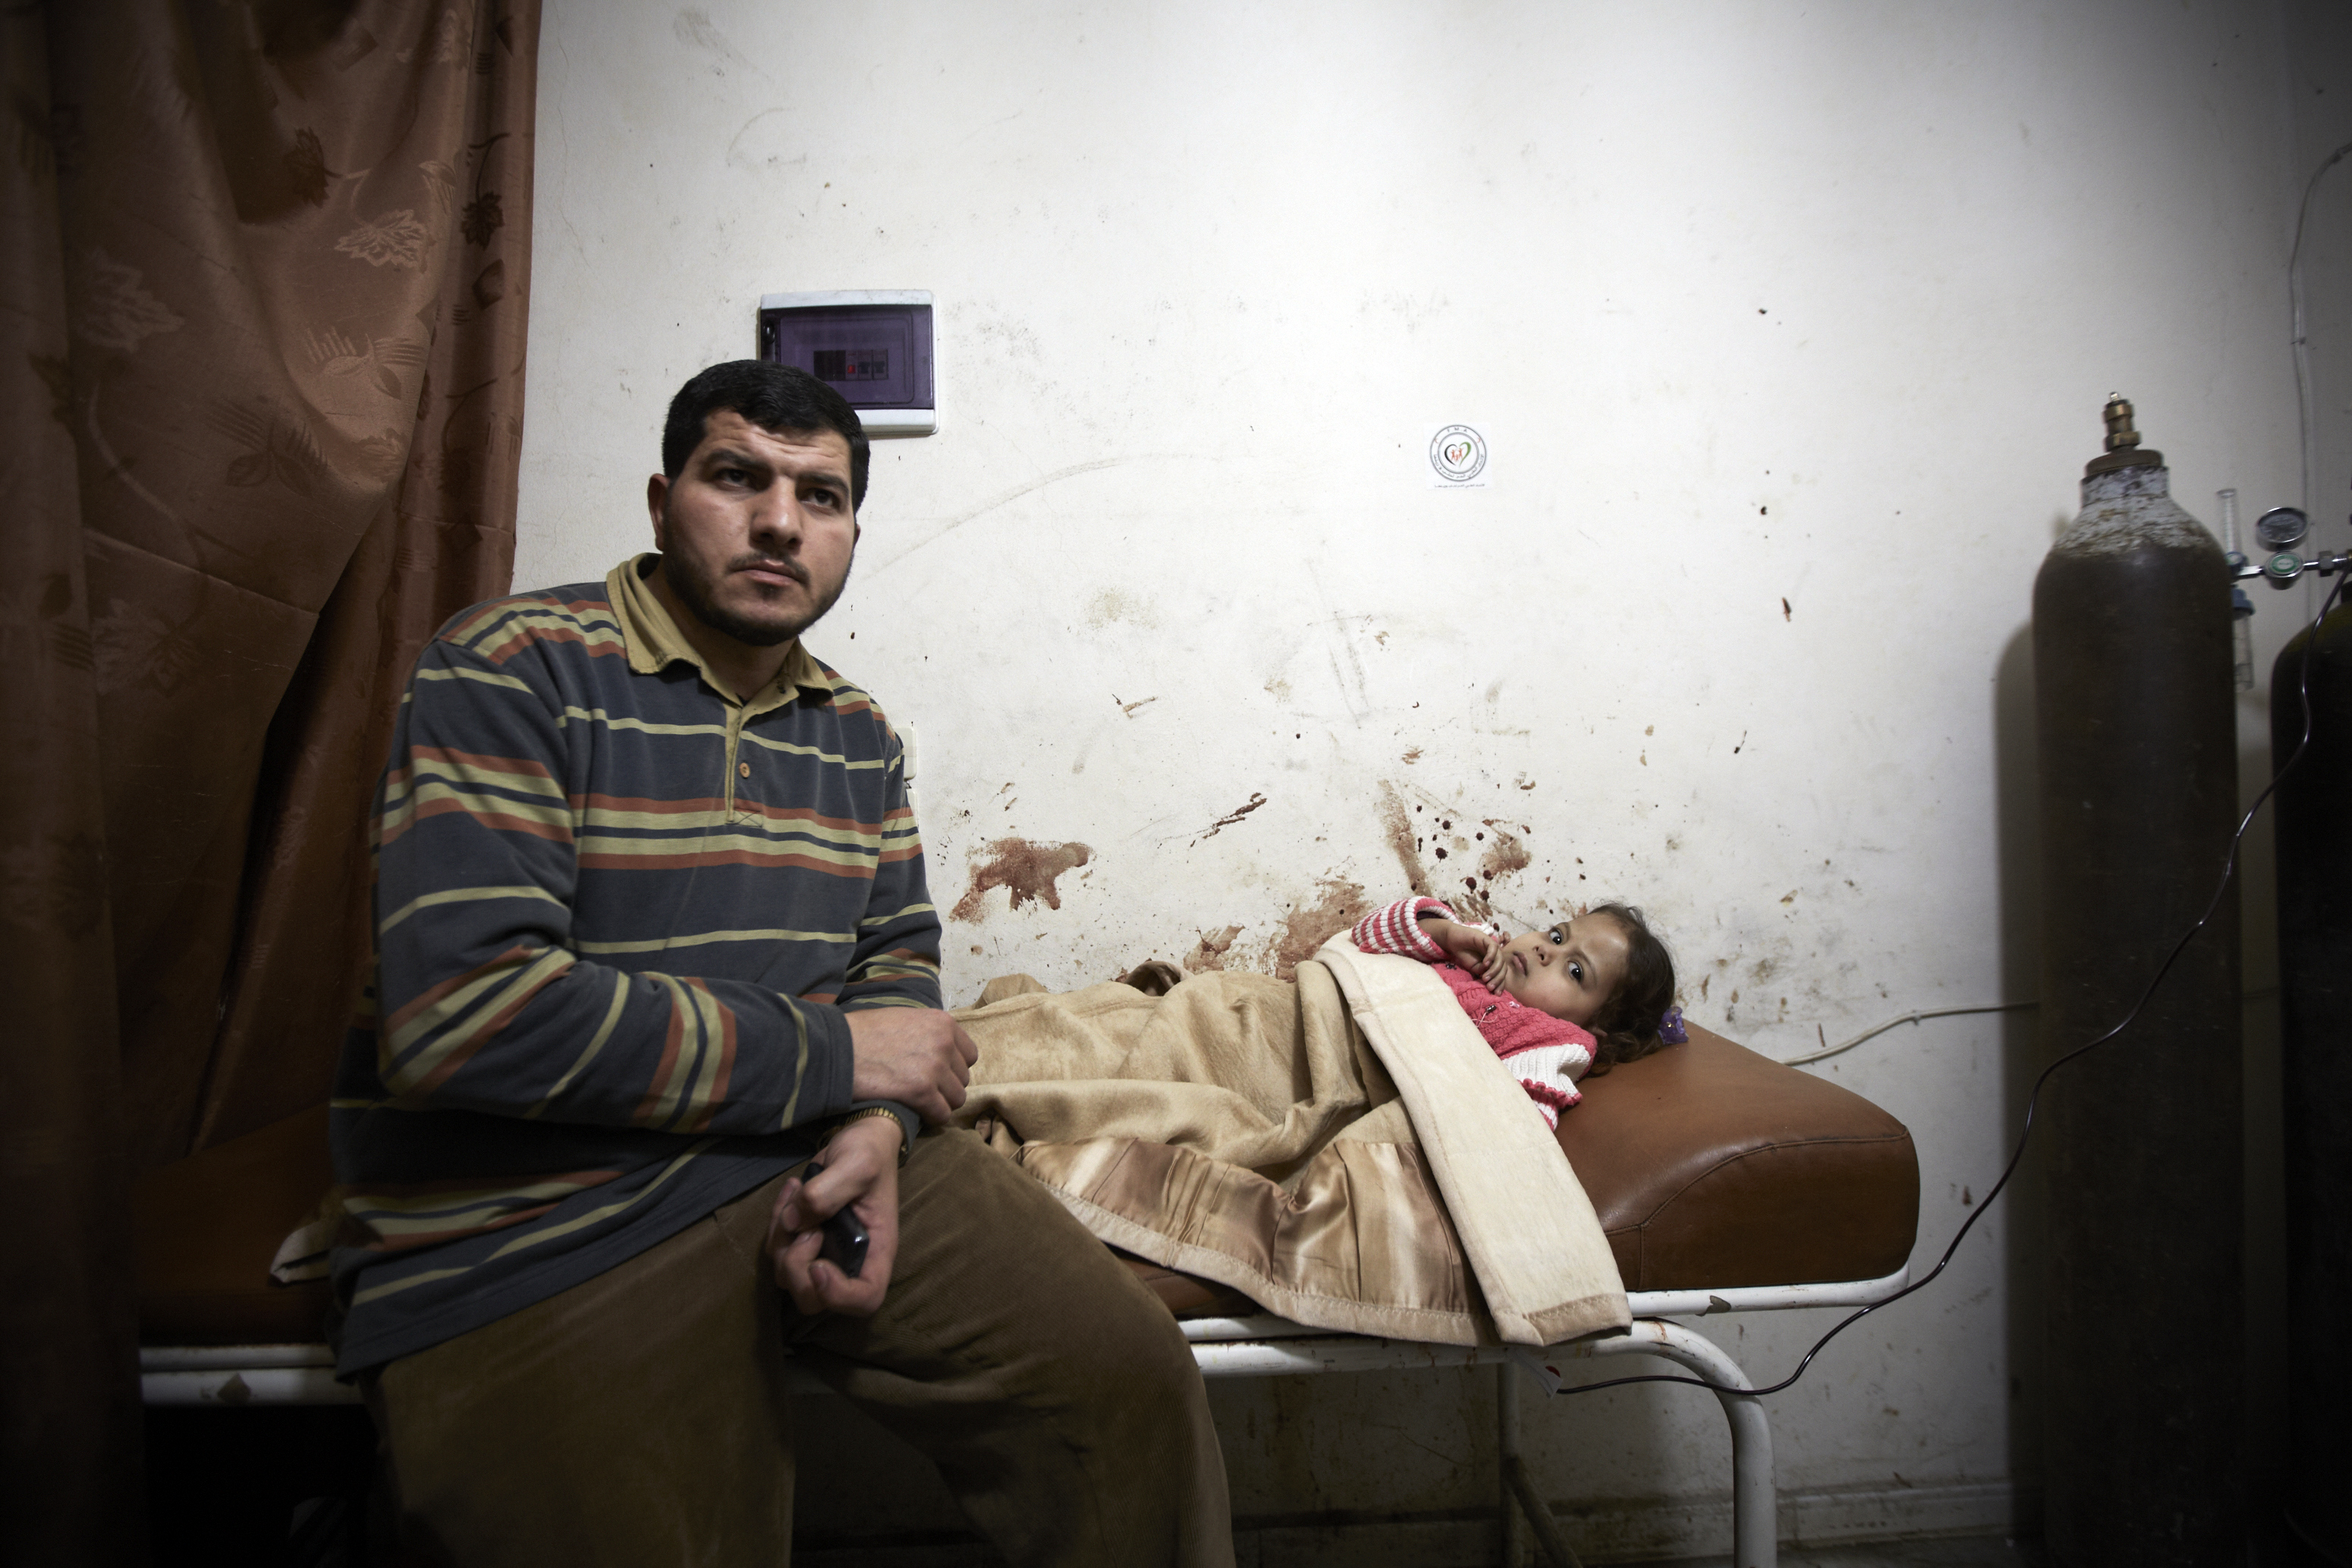 A wounded child is treated in a make shift hospital in Aleppo after her home was randomly targeted by the regime's artillery, on March 15, 2013. (Sebastiano Tomada—SIPA USA/AP)